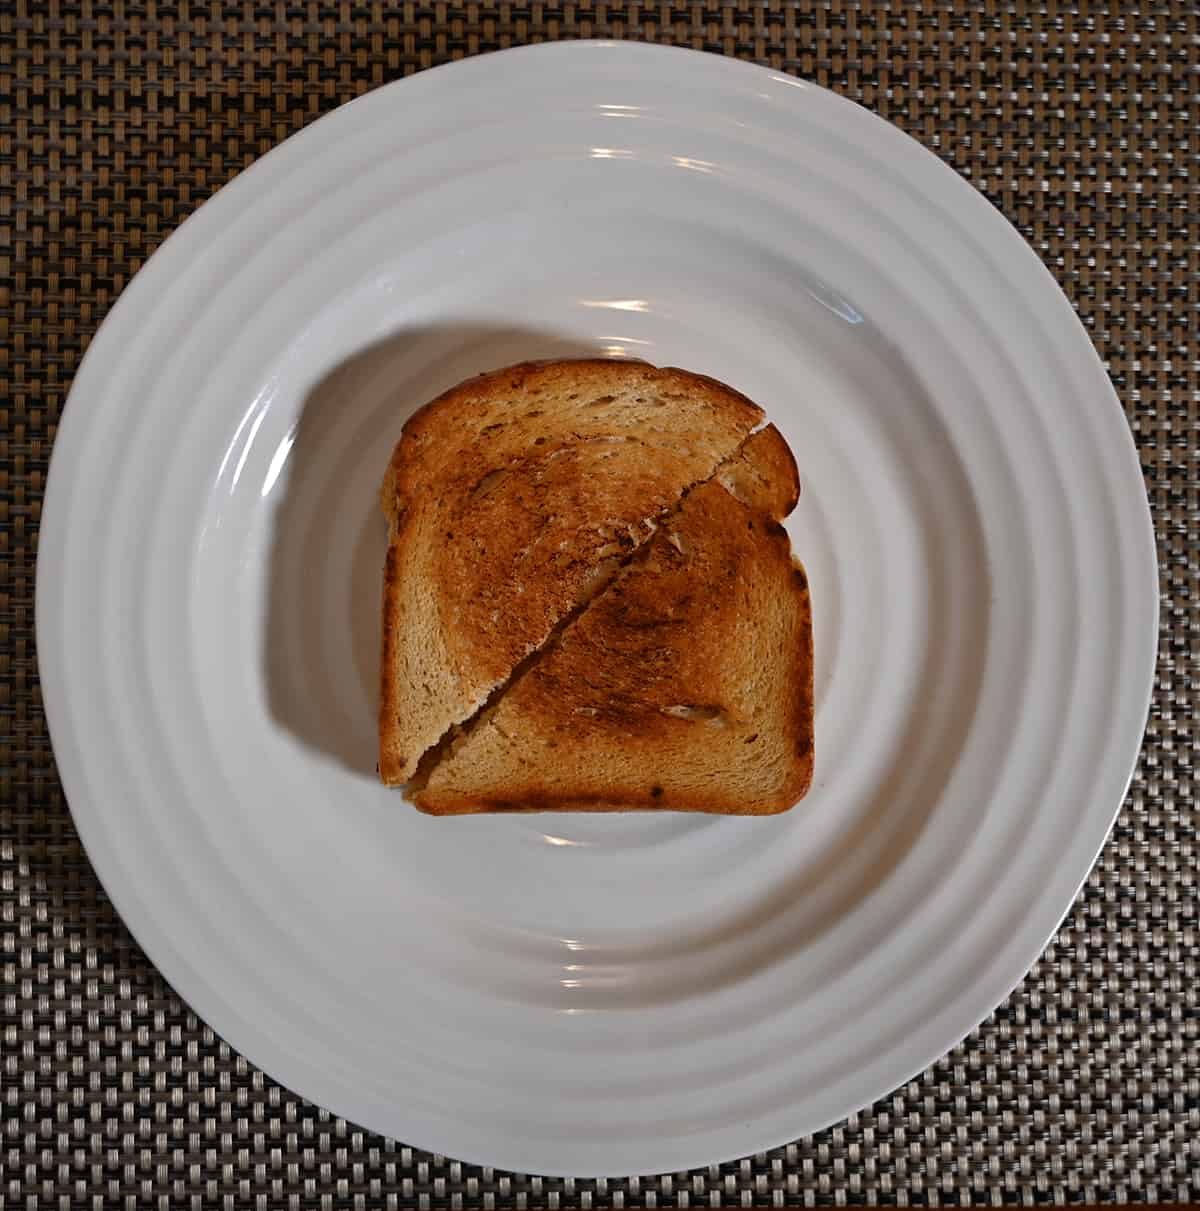 Top down image of a toasted grilled cheese cut in half and served on a white plate.